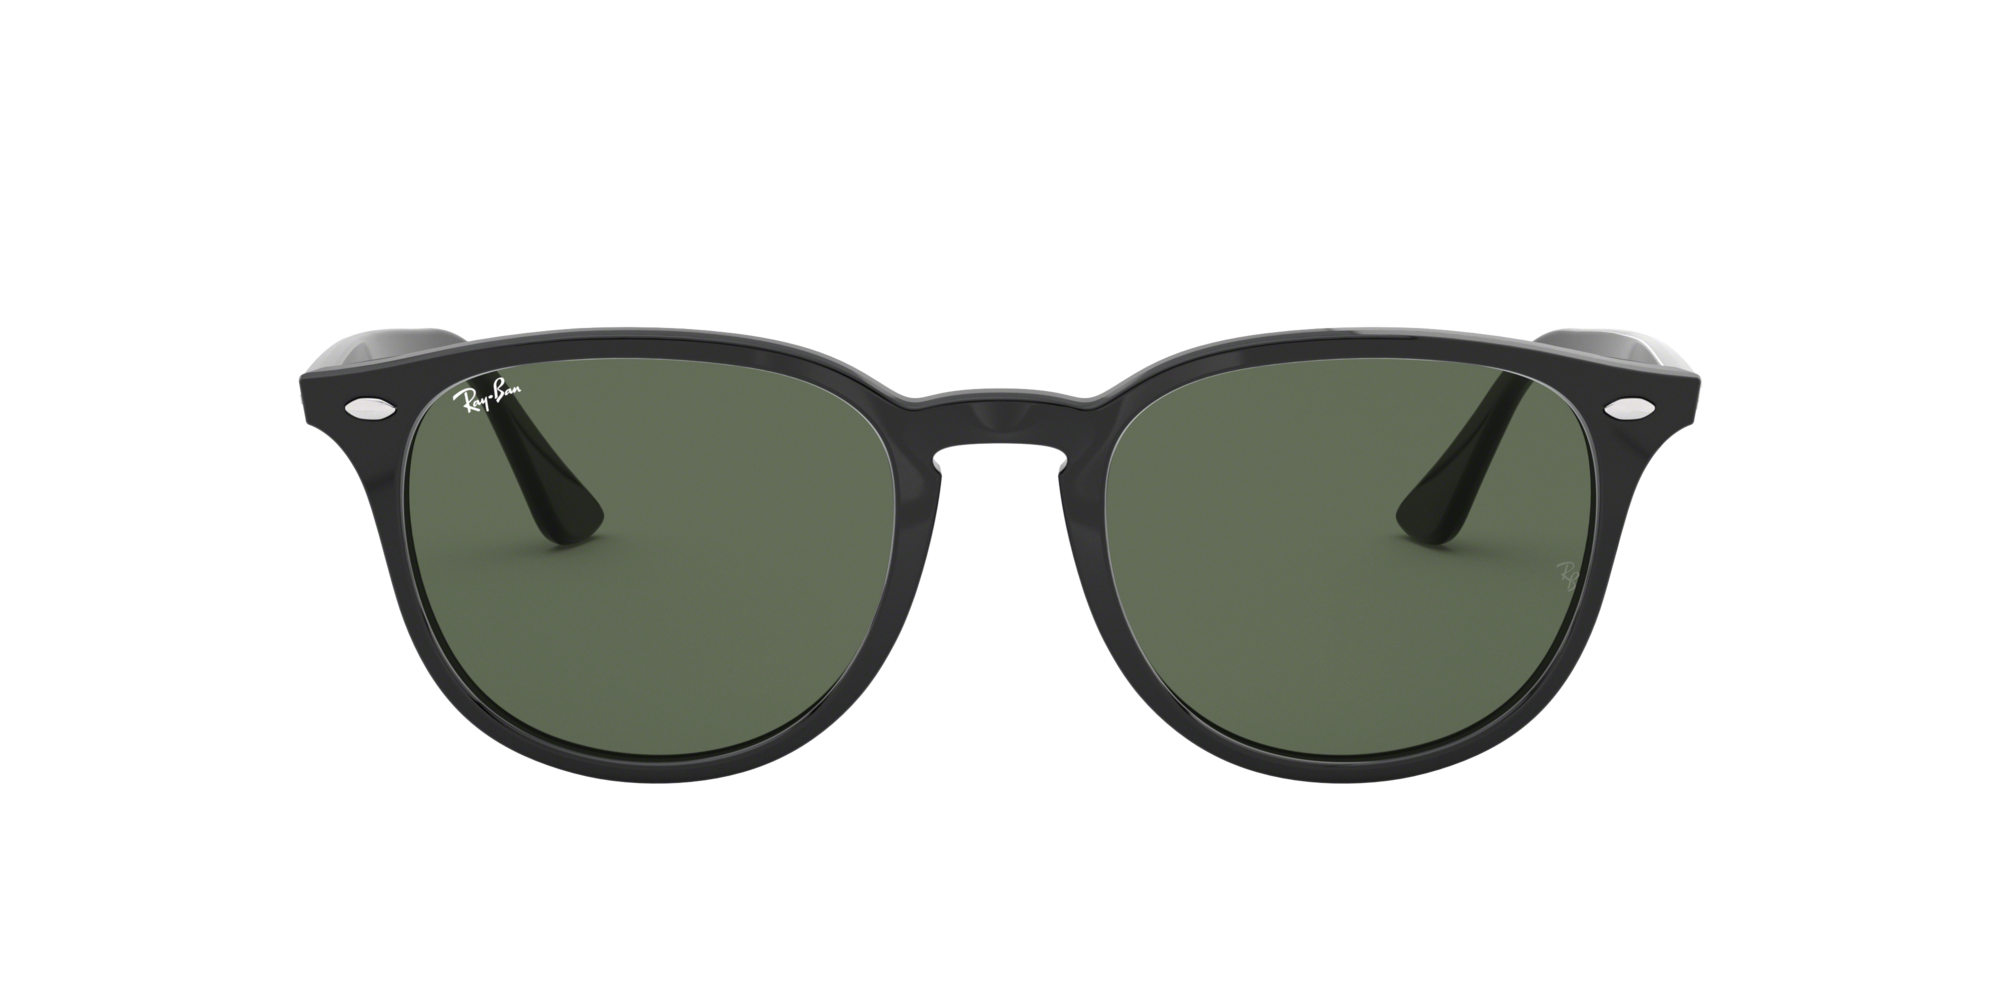 [products.image.front] RAY-BAN RB4259 601/71